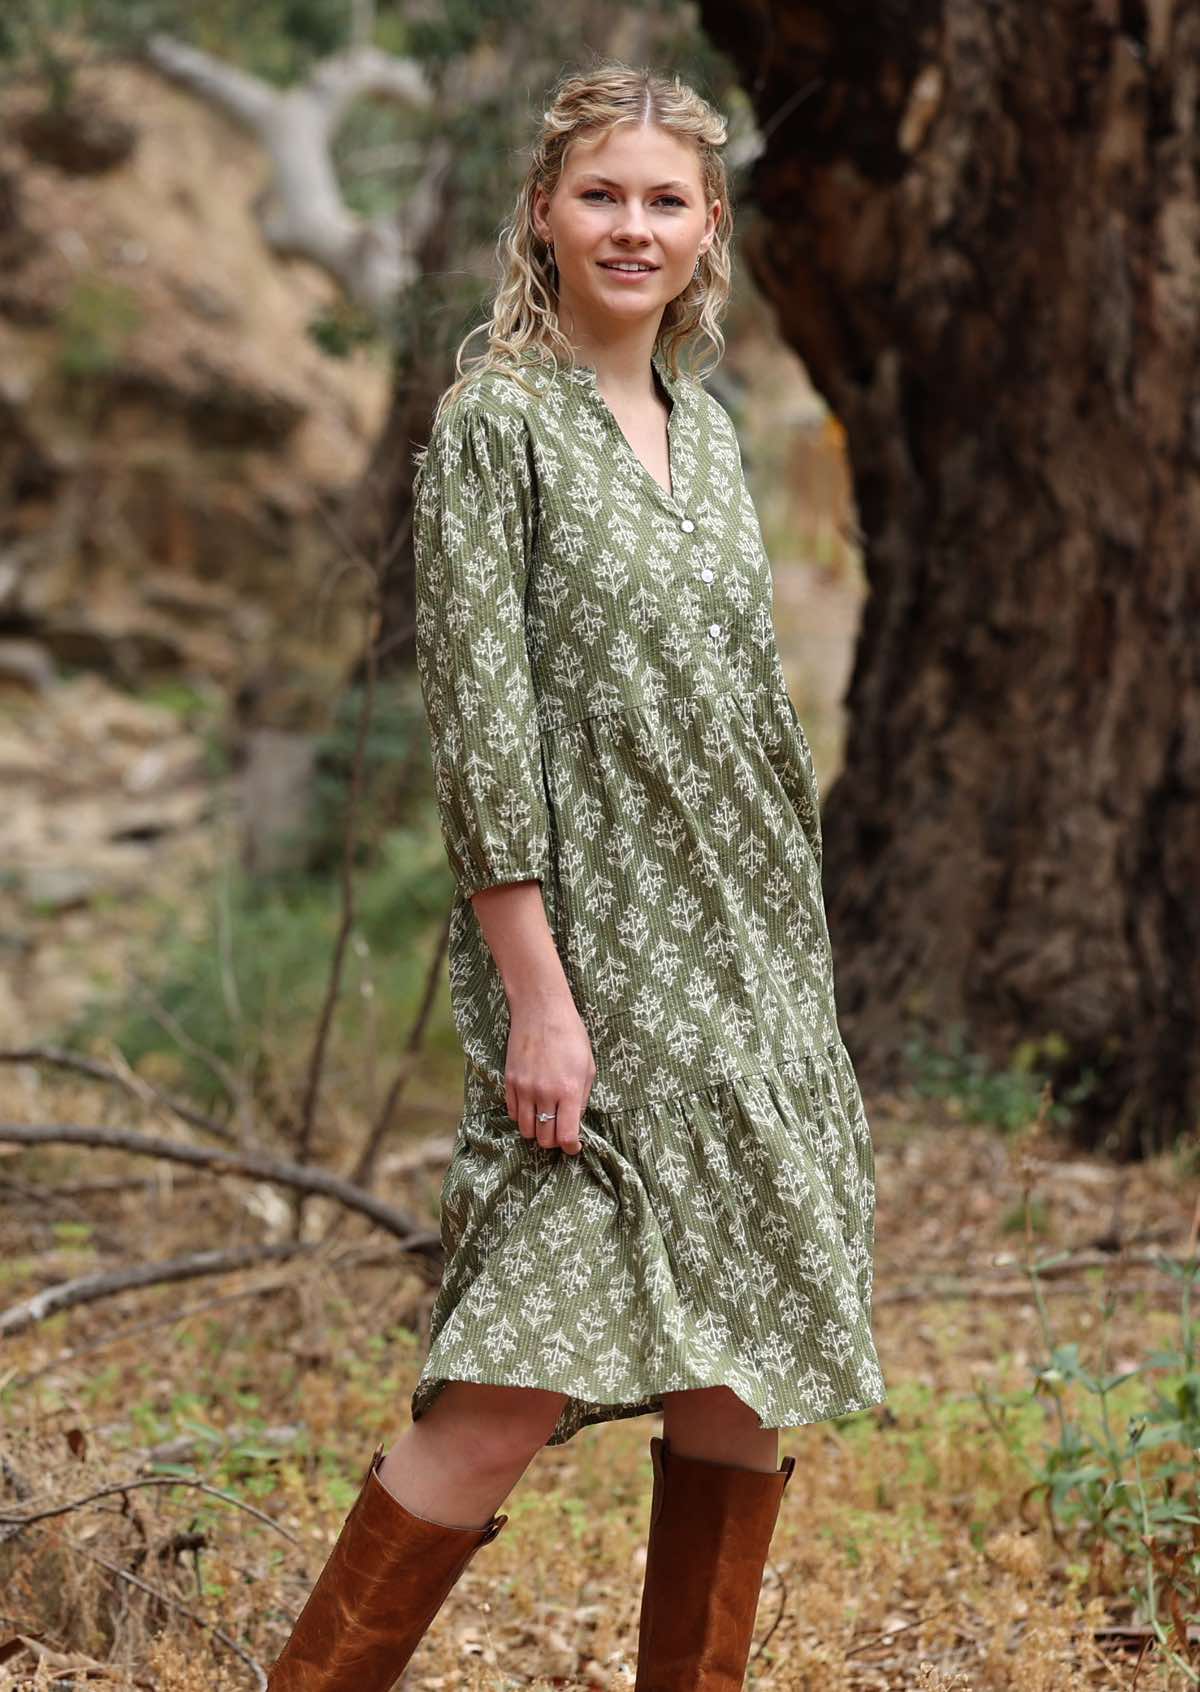 Lightweight cotton boho dress can be worn loose or belted for a defined waist